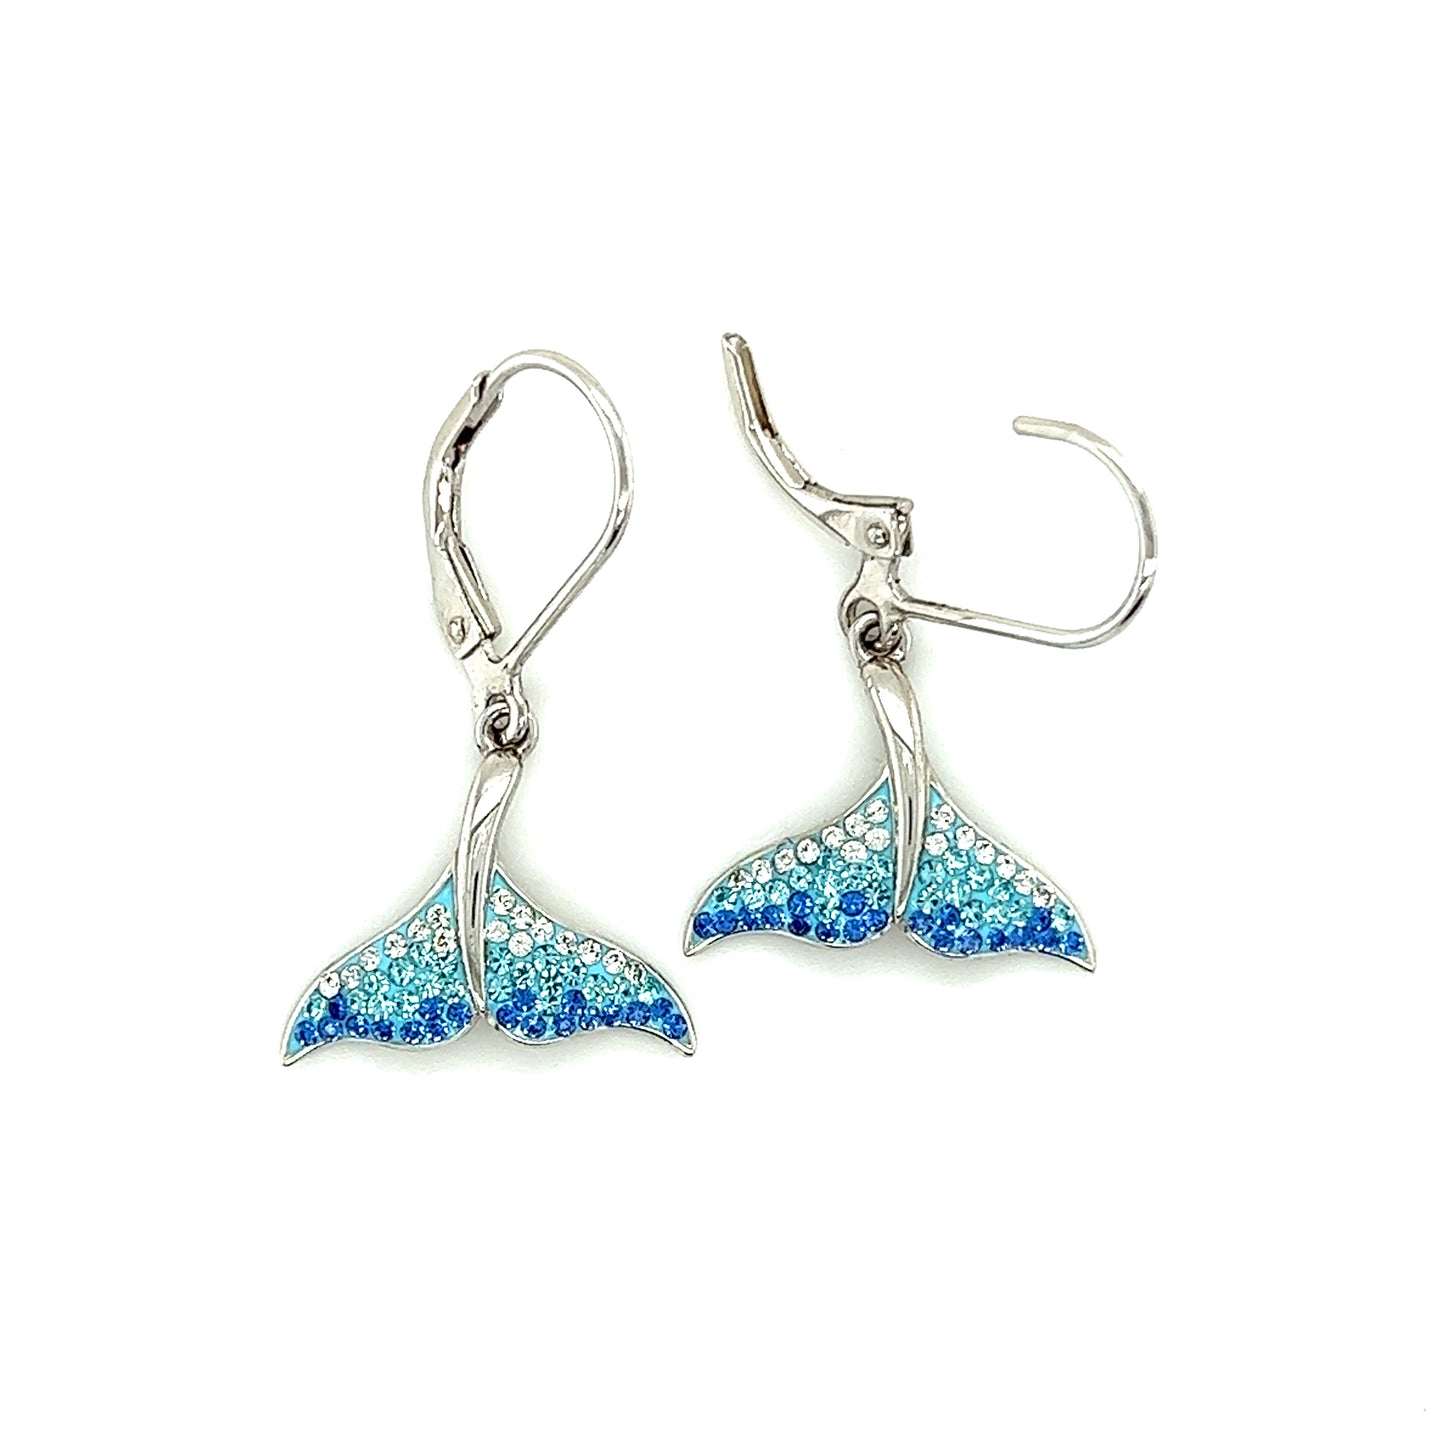 Whale Tail Dangle Earrings with White, Aqua and Blue Crystals in Sterling Silver Front View with Open Back